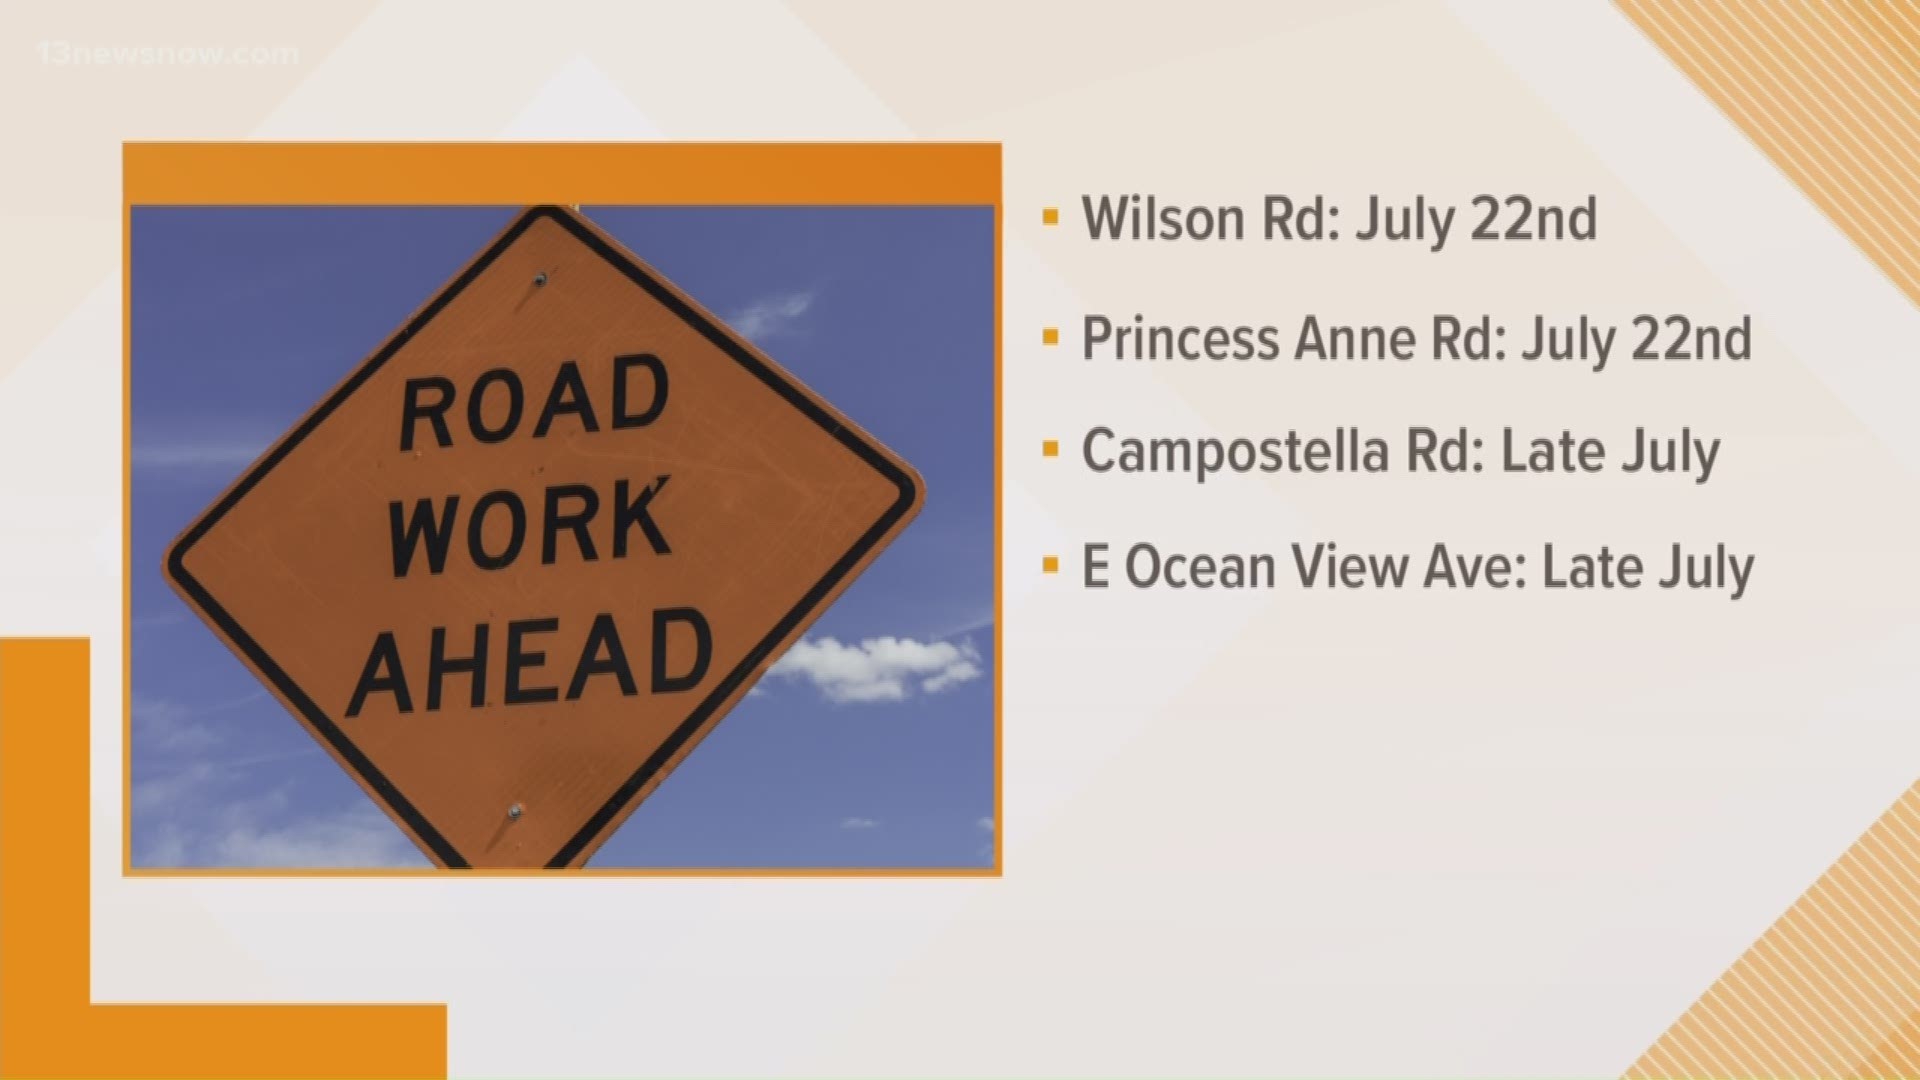 Starting July 22, city crews will begin repaving several streets in Norfolk until the middle of August.